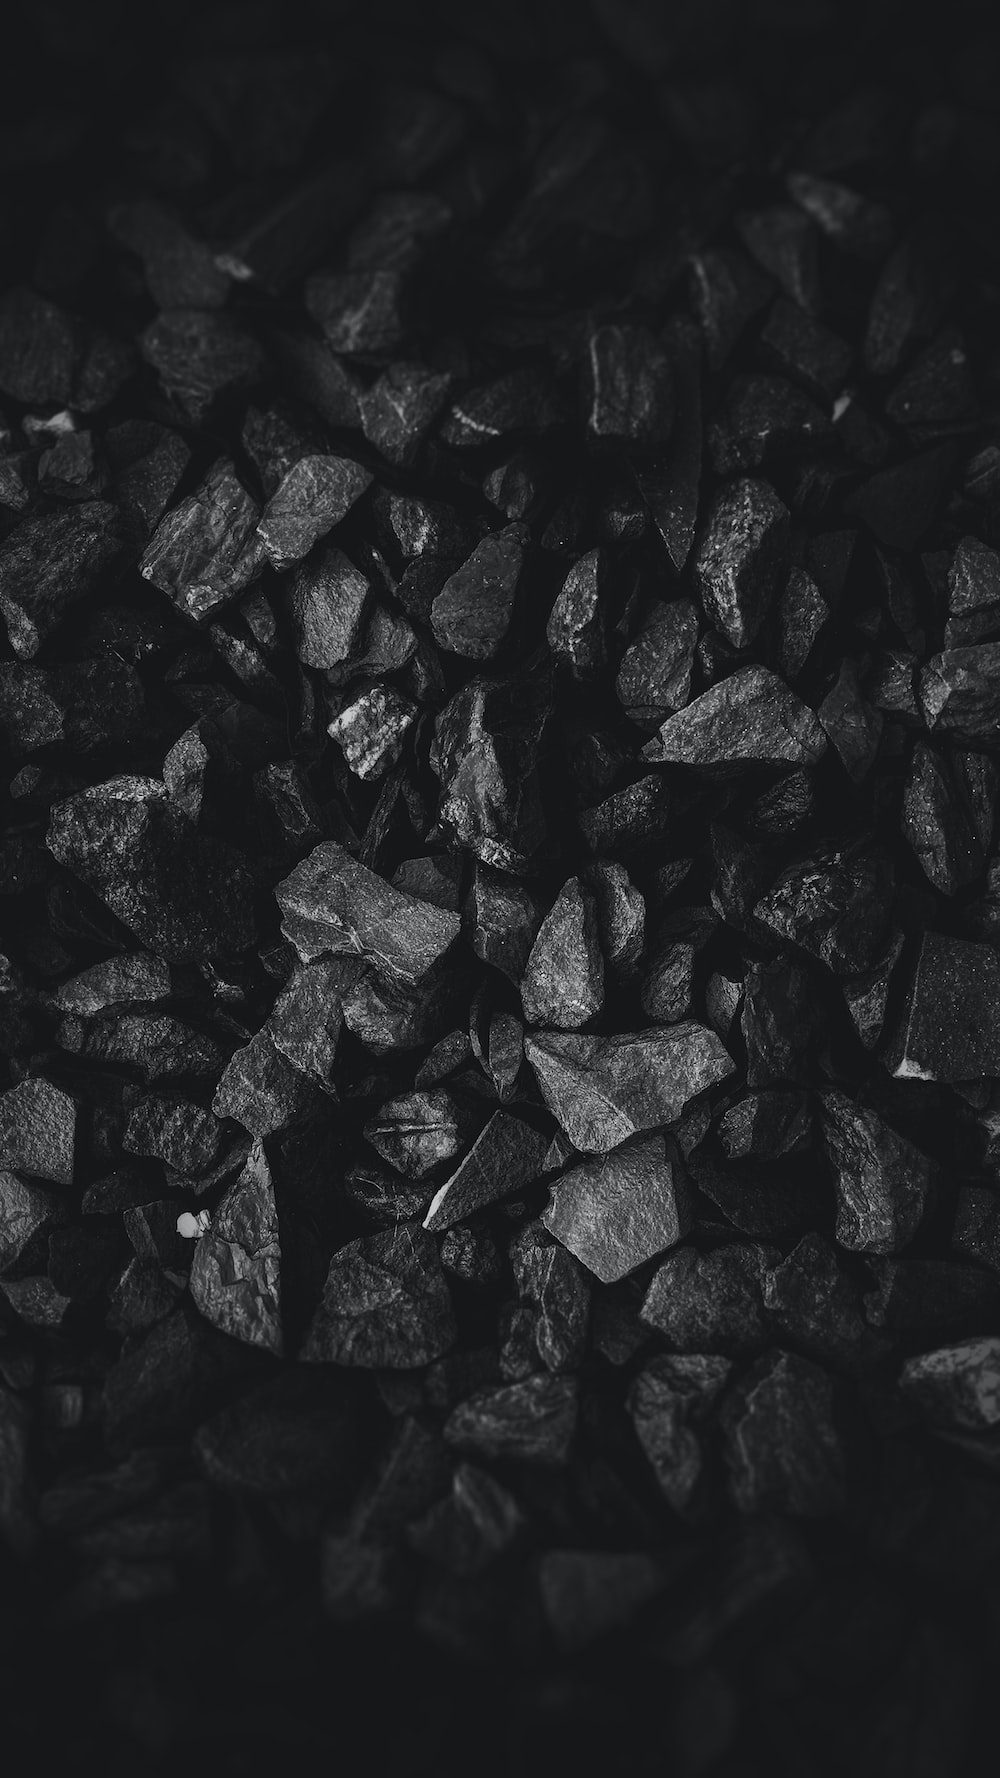 K black stone pictures download free images on